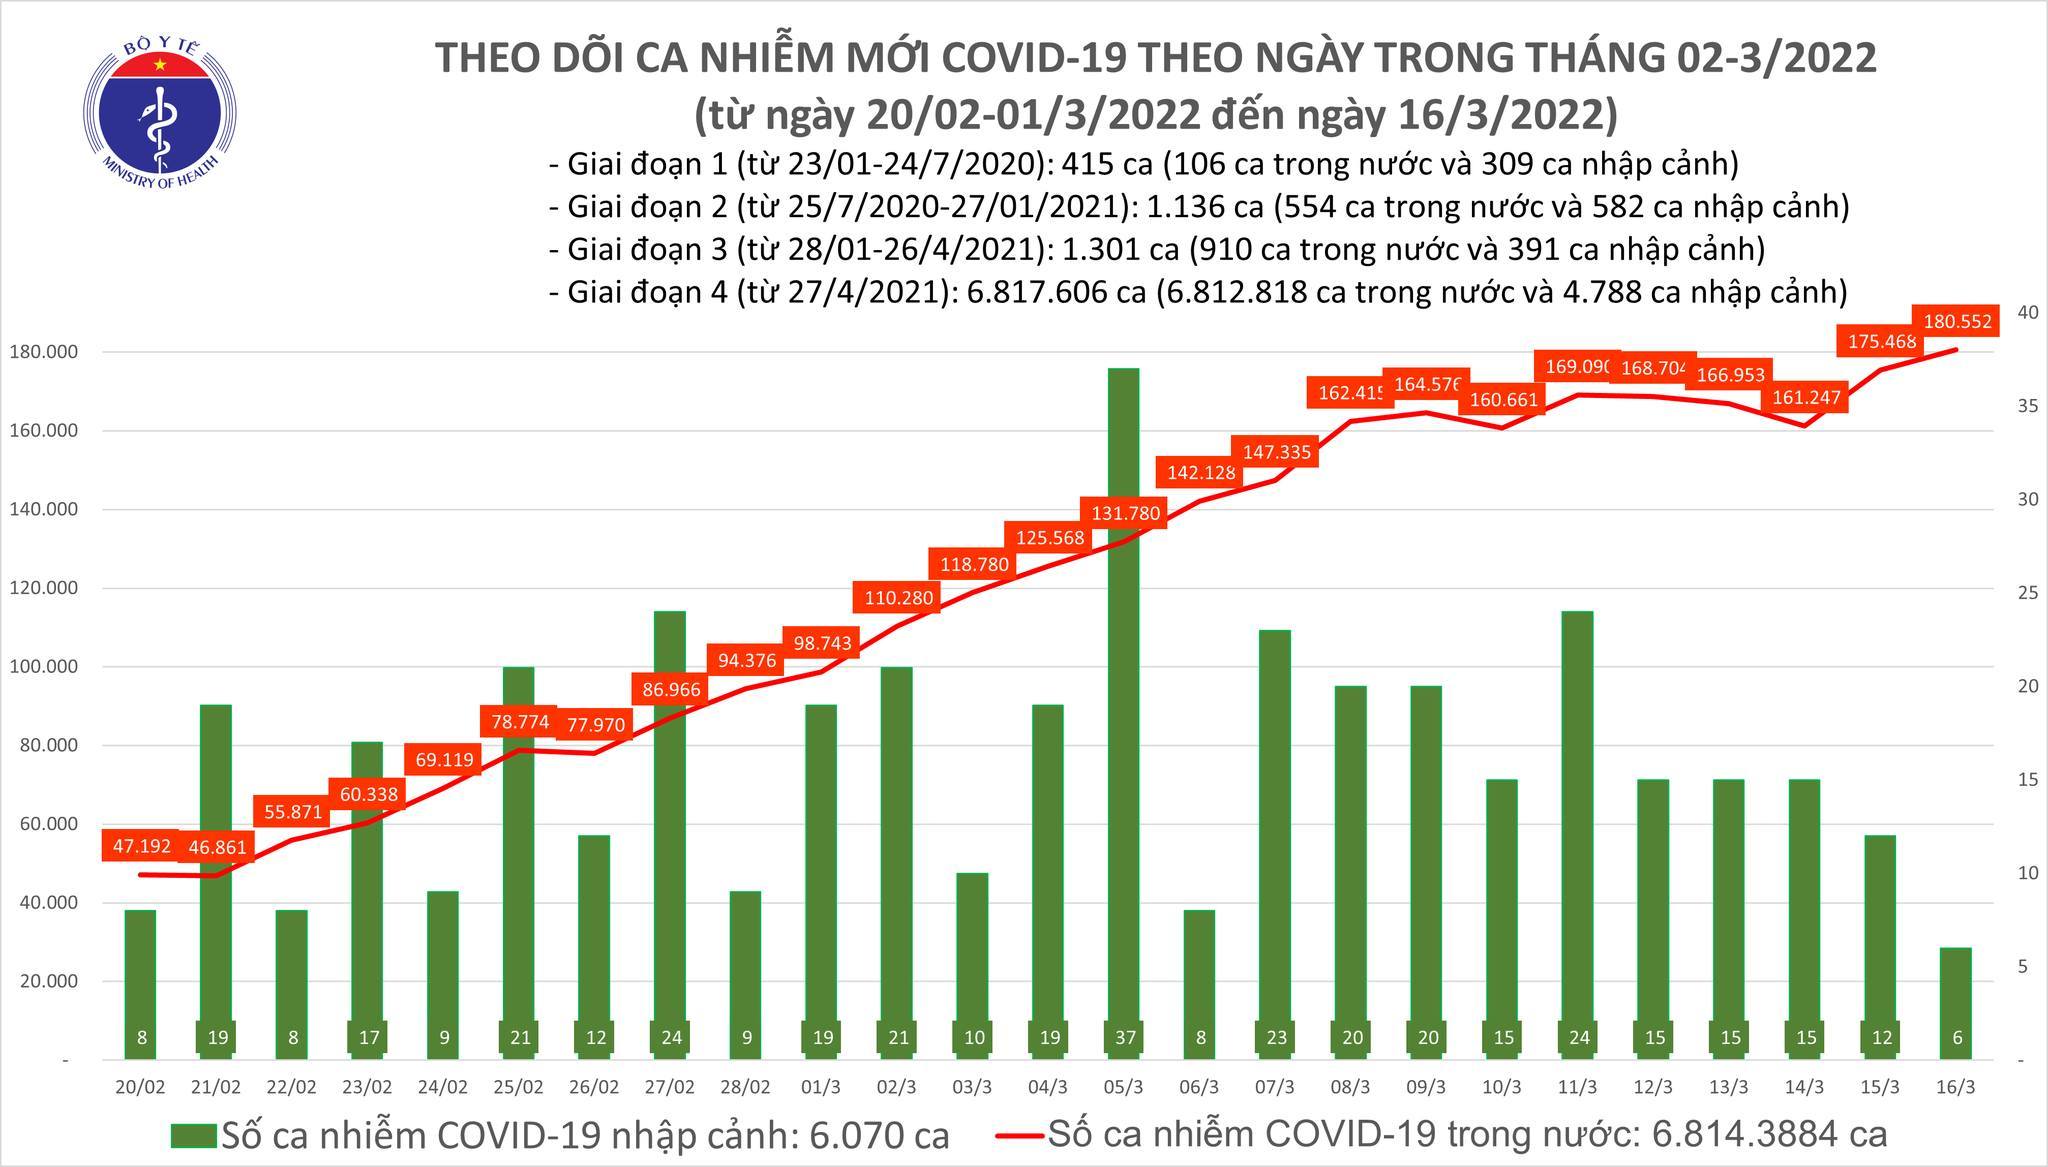 The whole country added 180,558 cases of Covid-19, Vinh Phuc and Binh Duong increased the most